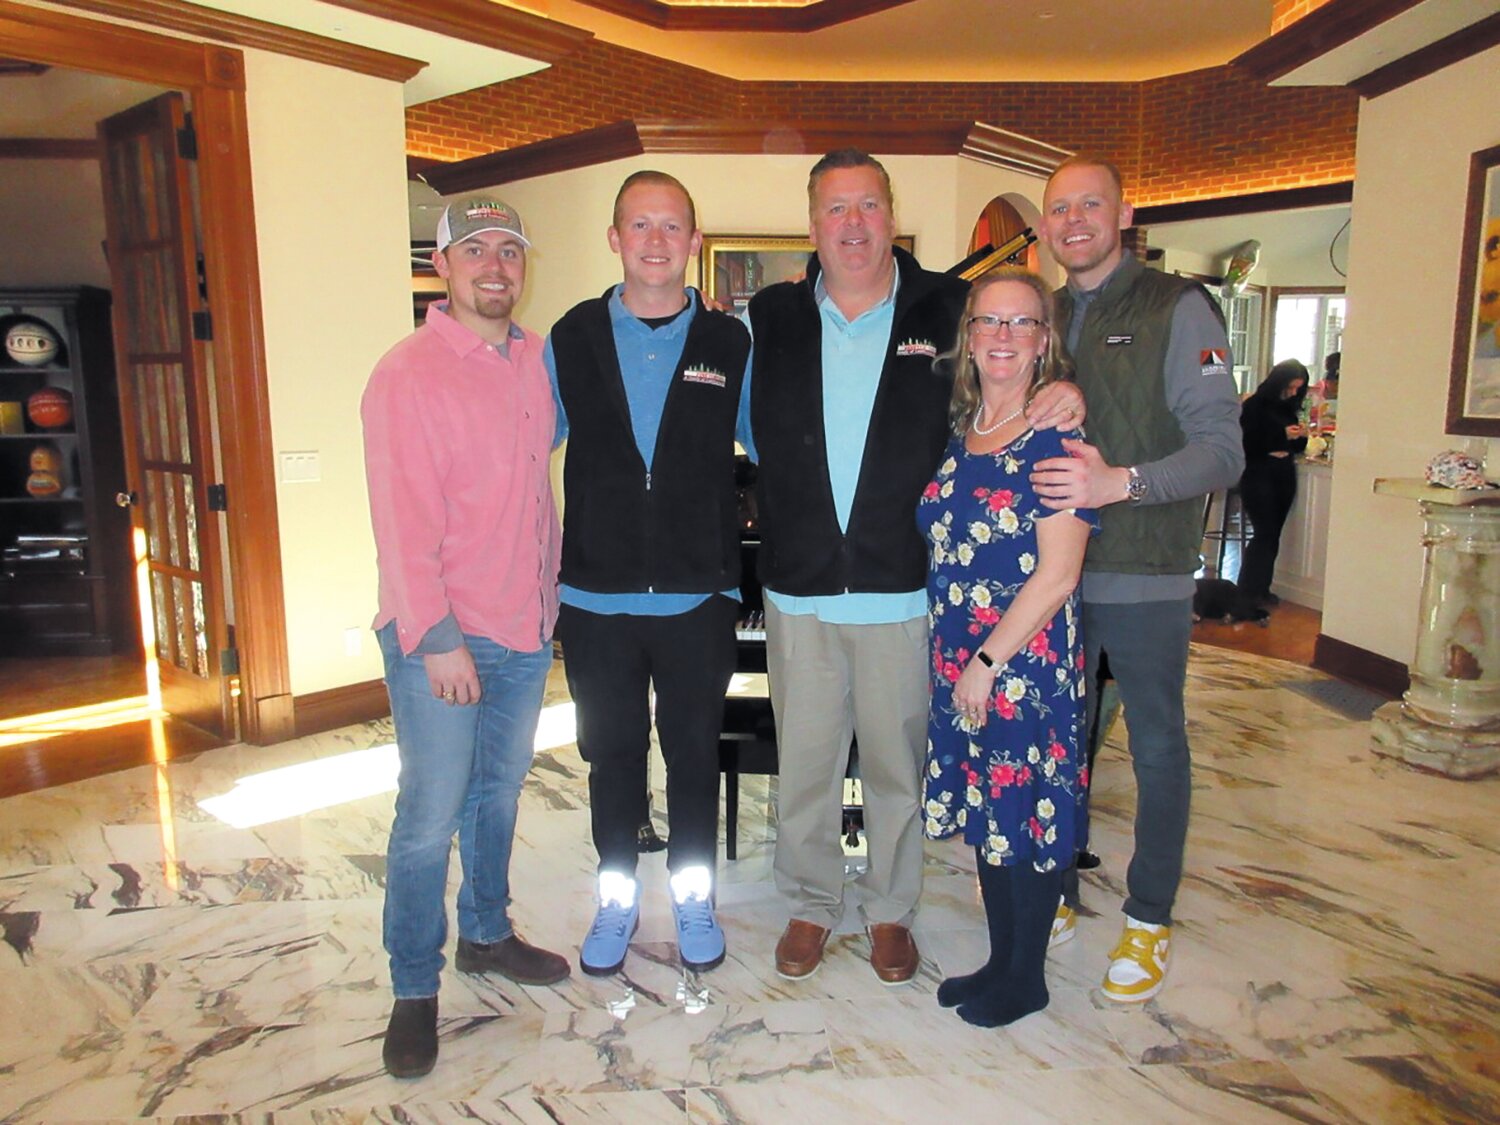 A FAMILY TEAM: The Finnegan Family recently facilitated A Wish Come True’s move from Warwick to Coventry. Pictured from left: Evan Finnegan, Ryan Finnegan, Bill Finnegan, Kerri Finnegan and Sean Finnegan. (Submitted photo)